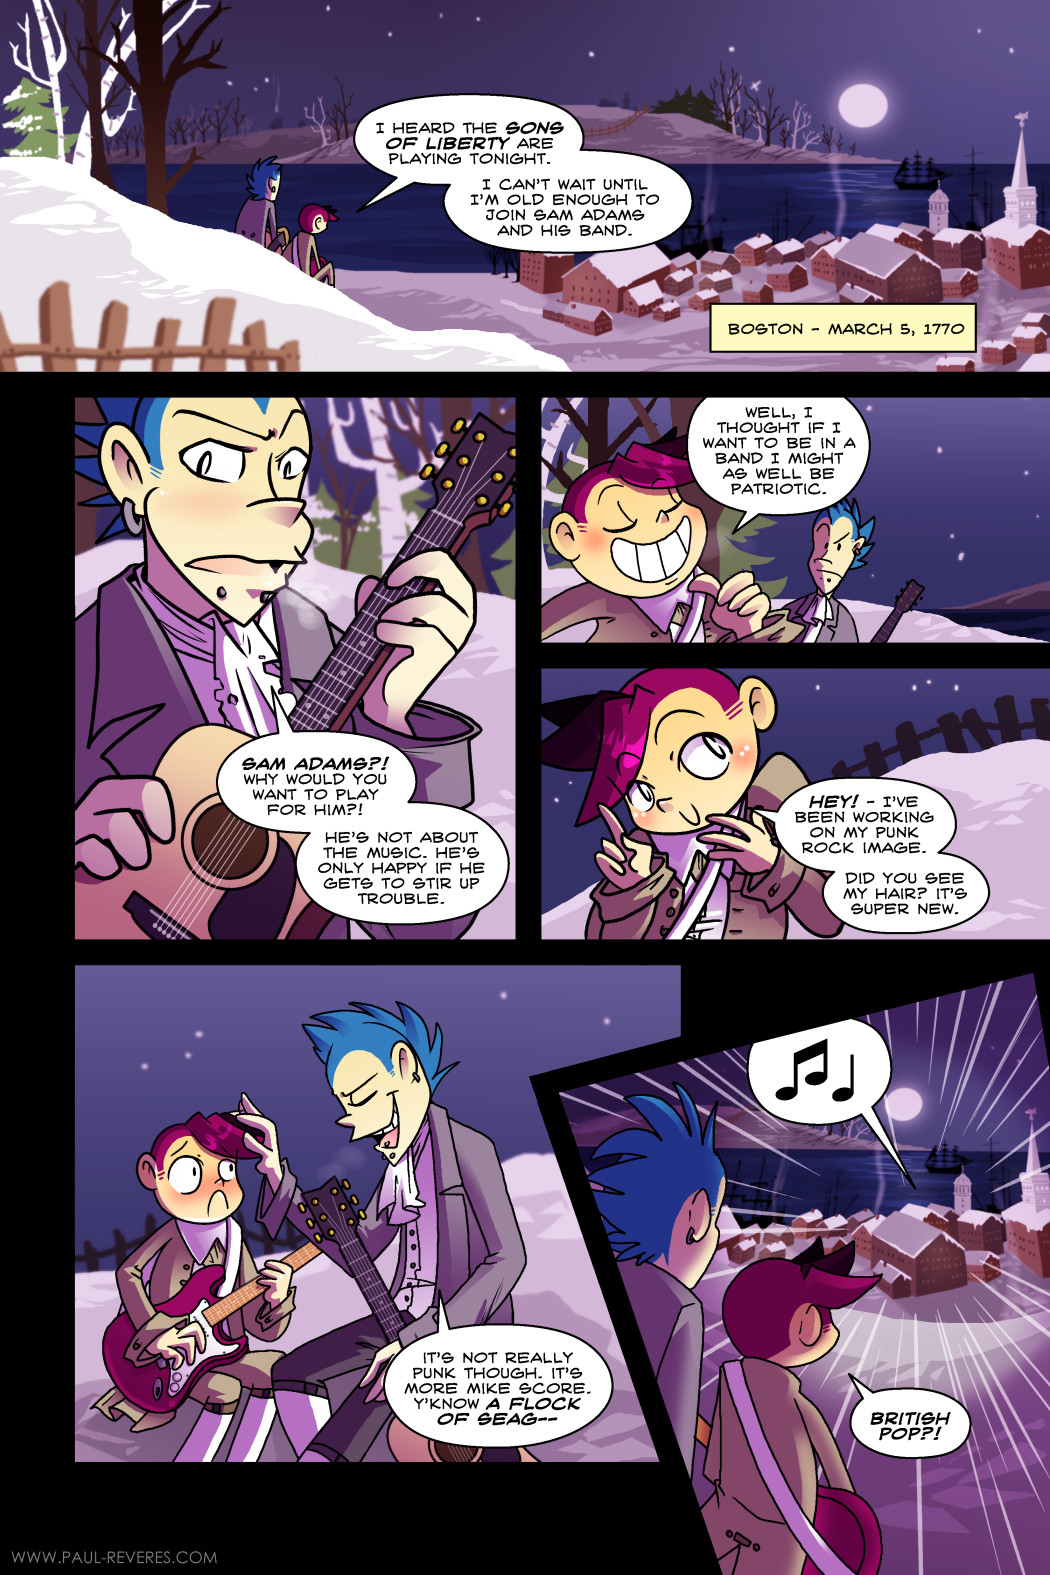 The Paul Reveres - Issue 1, Page 1